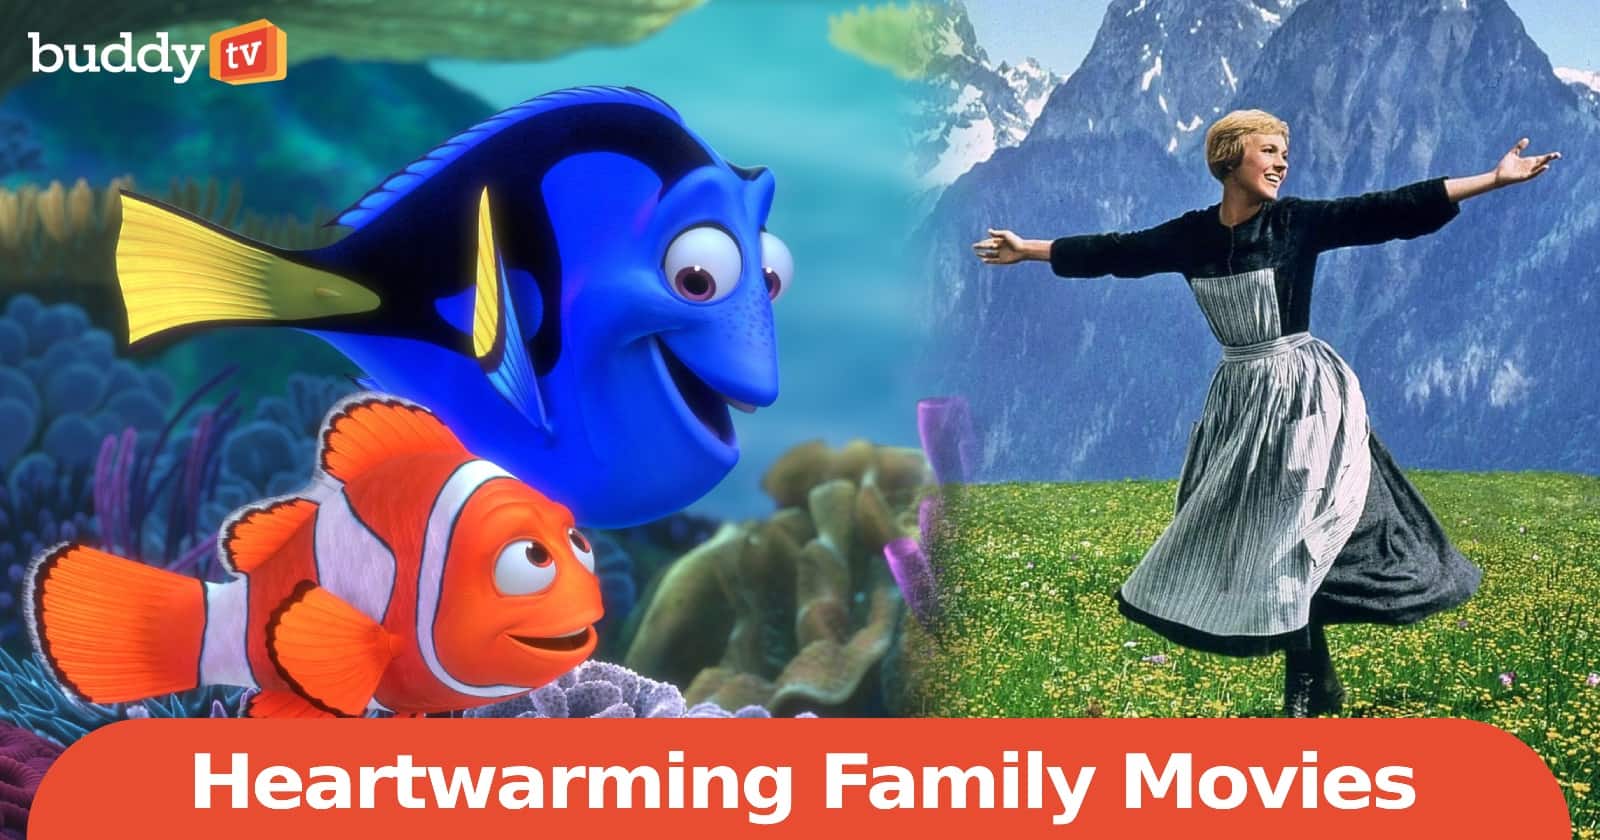 15 Heartwarming Family Movies for Quality Bonding with Your Kids